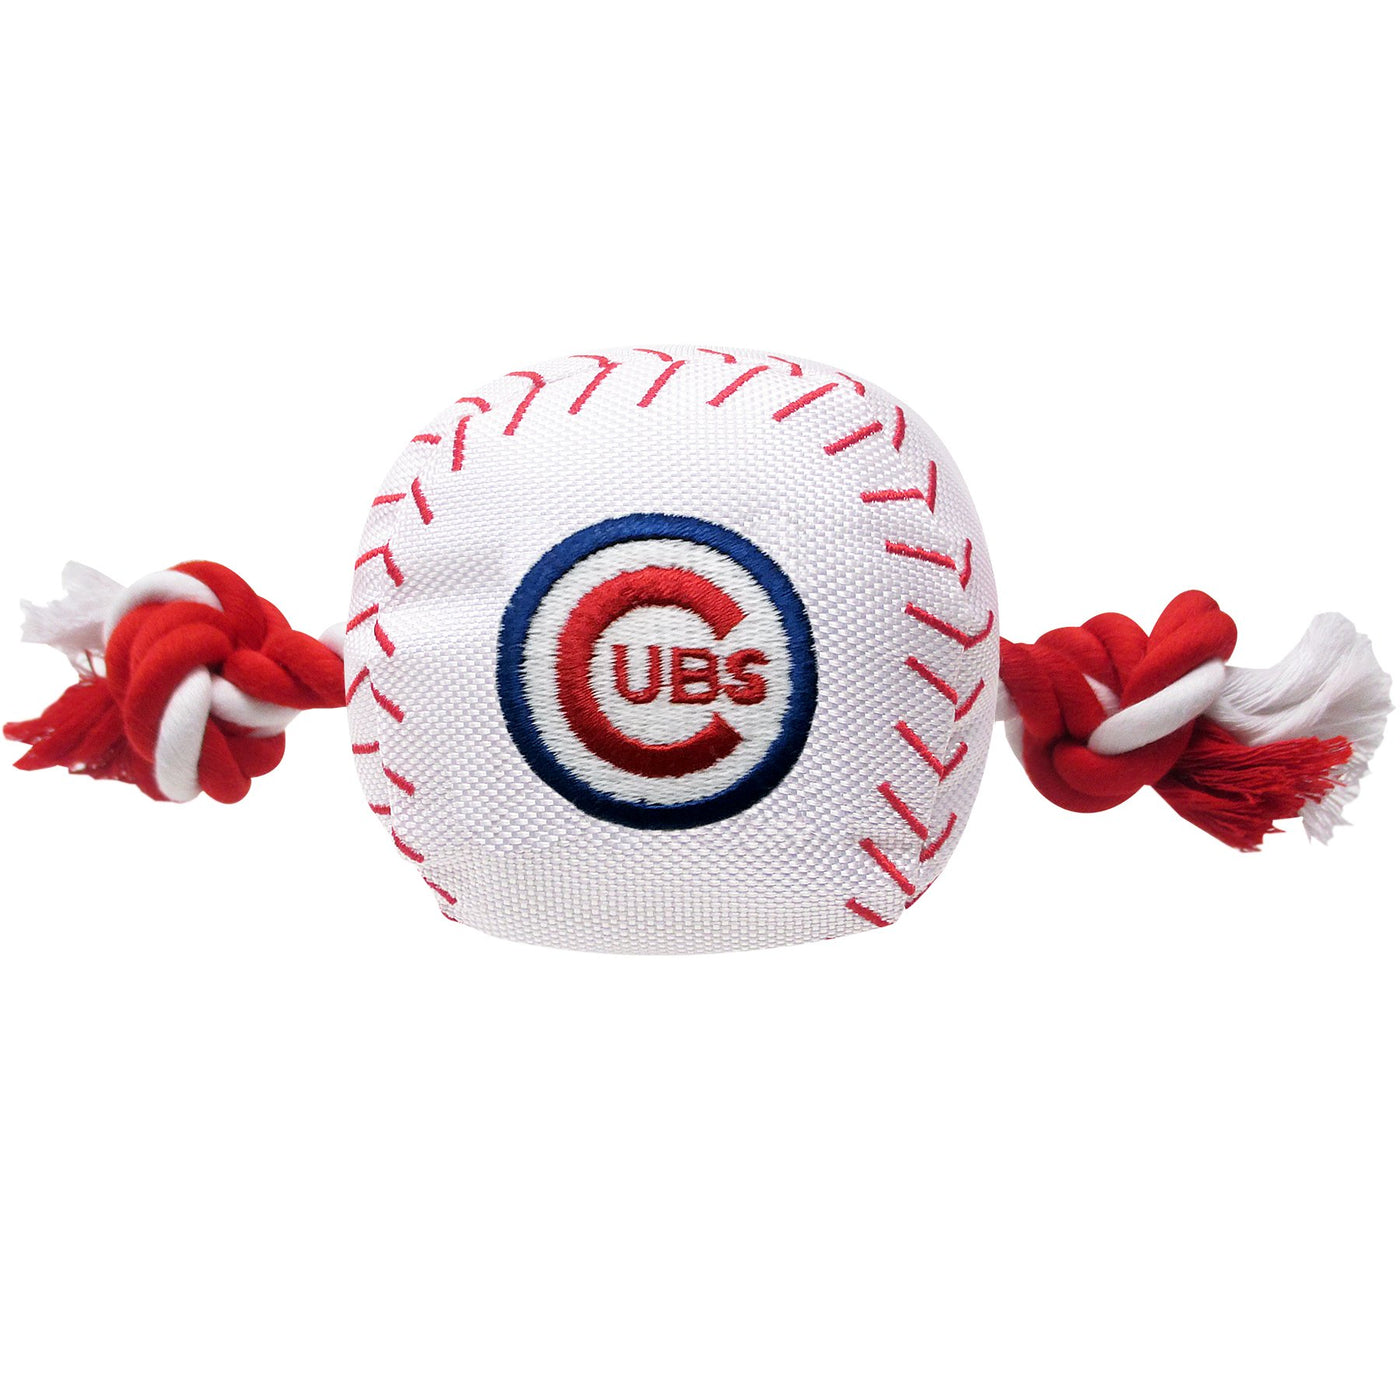 CHICAGO CUBS PET BASEBALL TOY - Ivy Shop